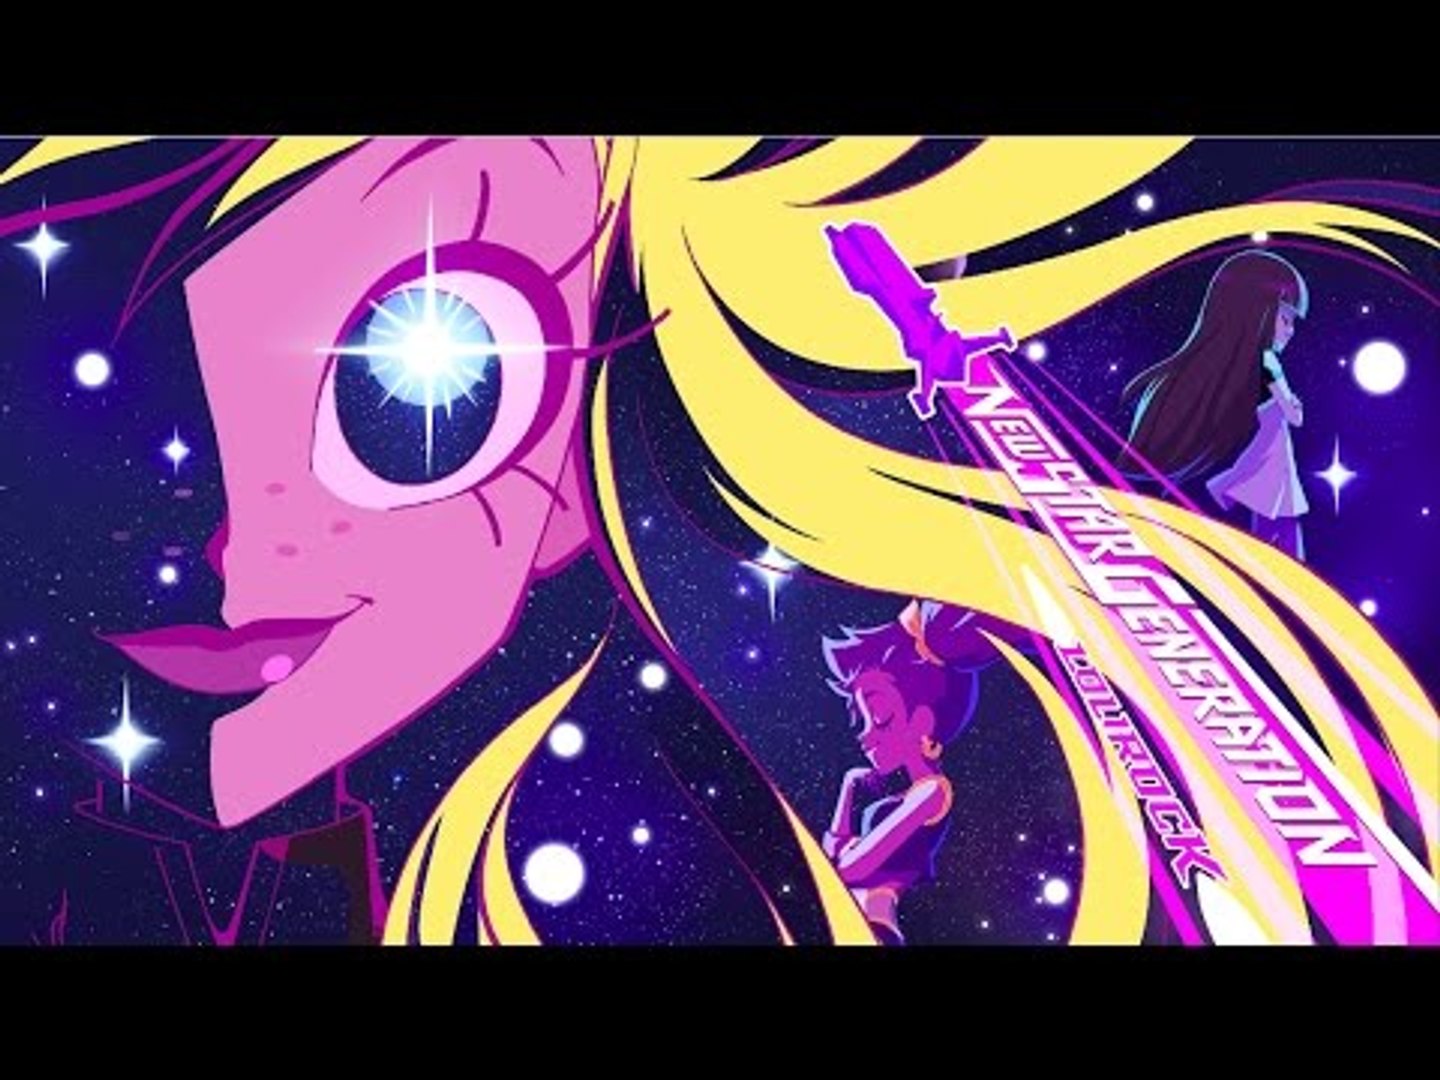 LoliRock (Songs from the Hit TV Series) - Album by LoliRock